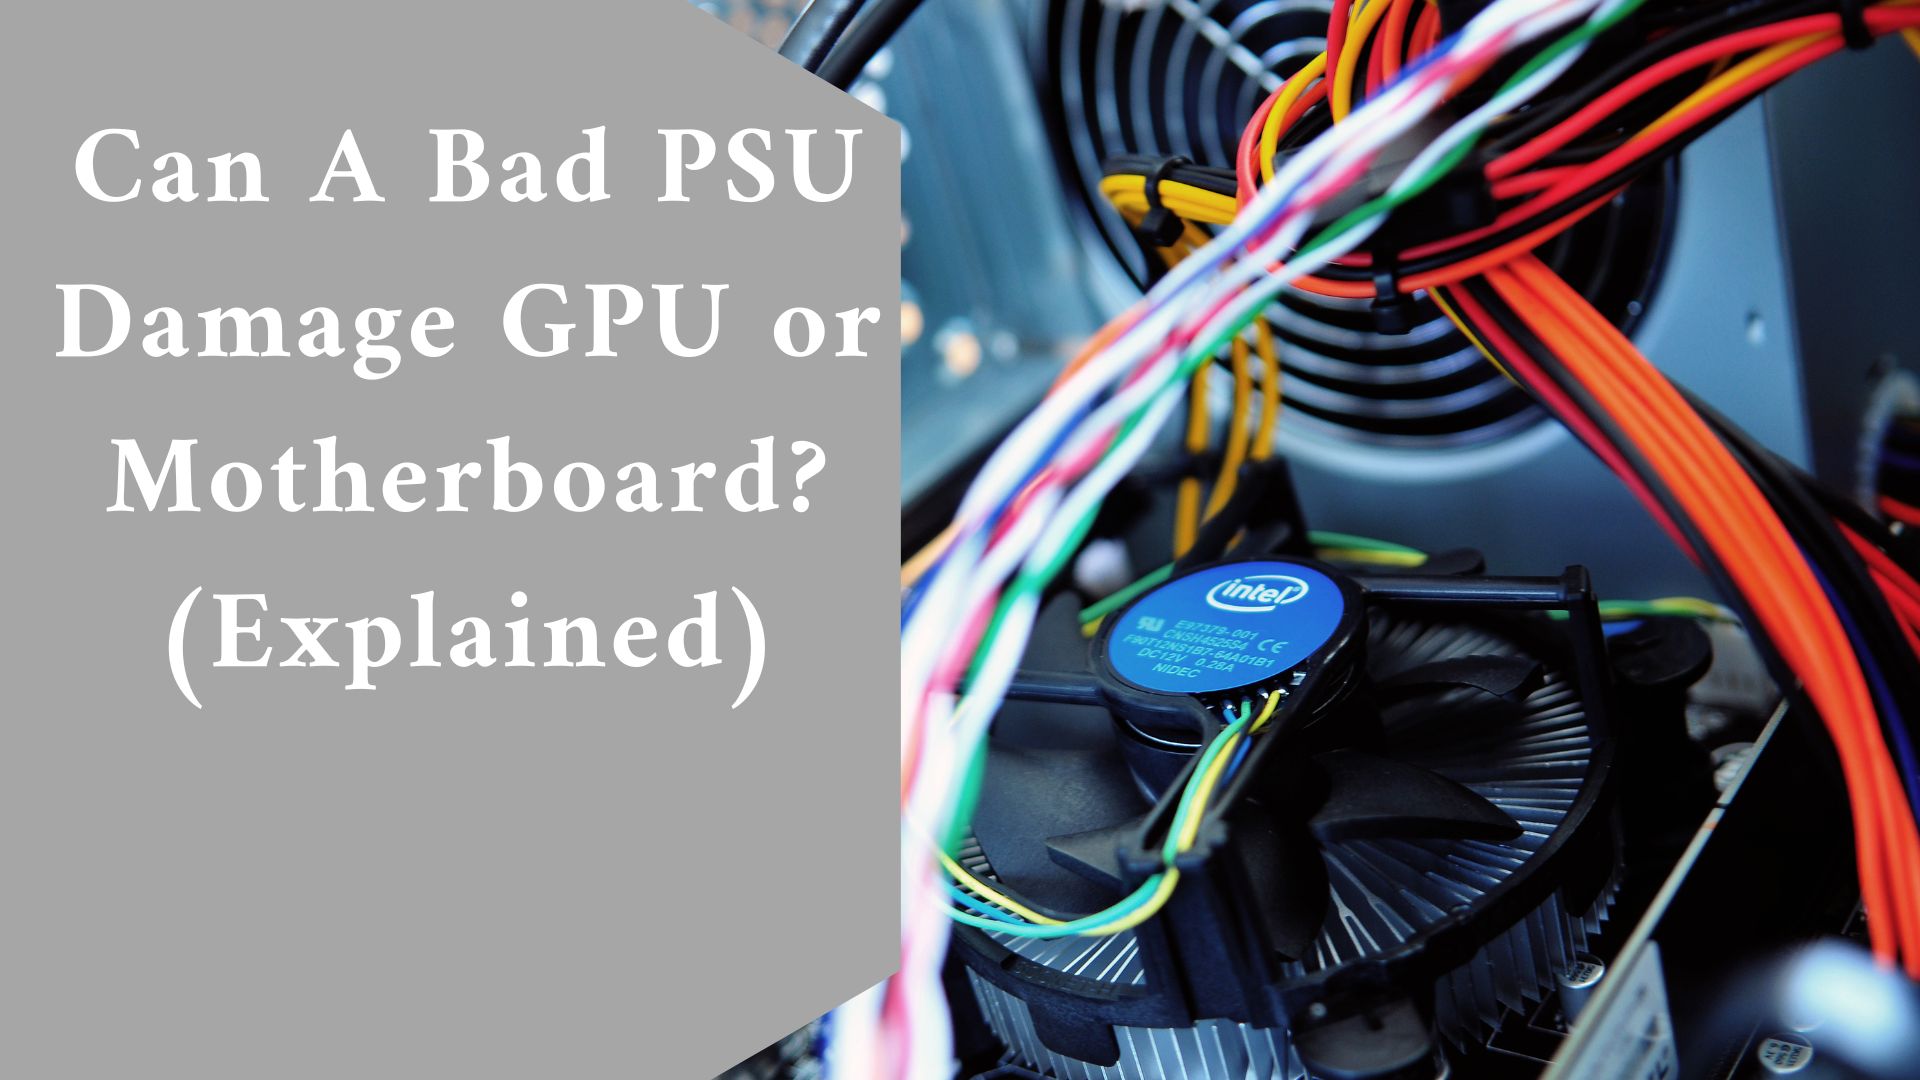 Can A Bad PSU Damage GPU or Motherboard? (Explained)